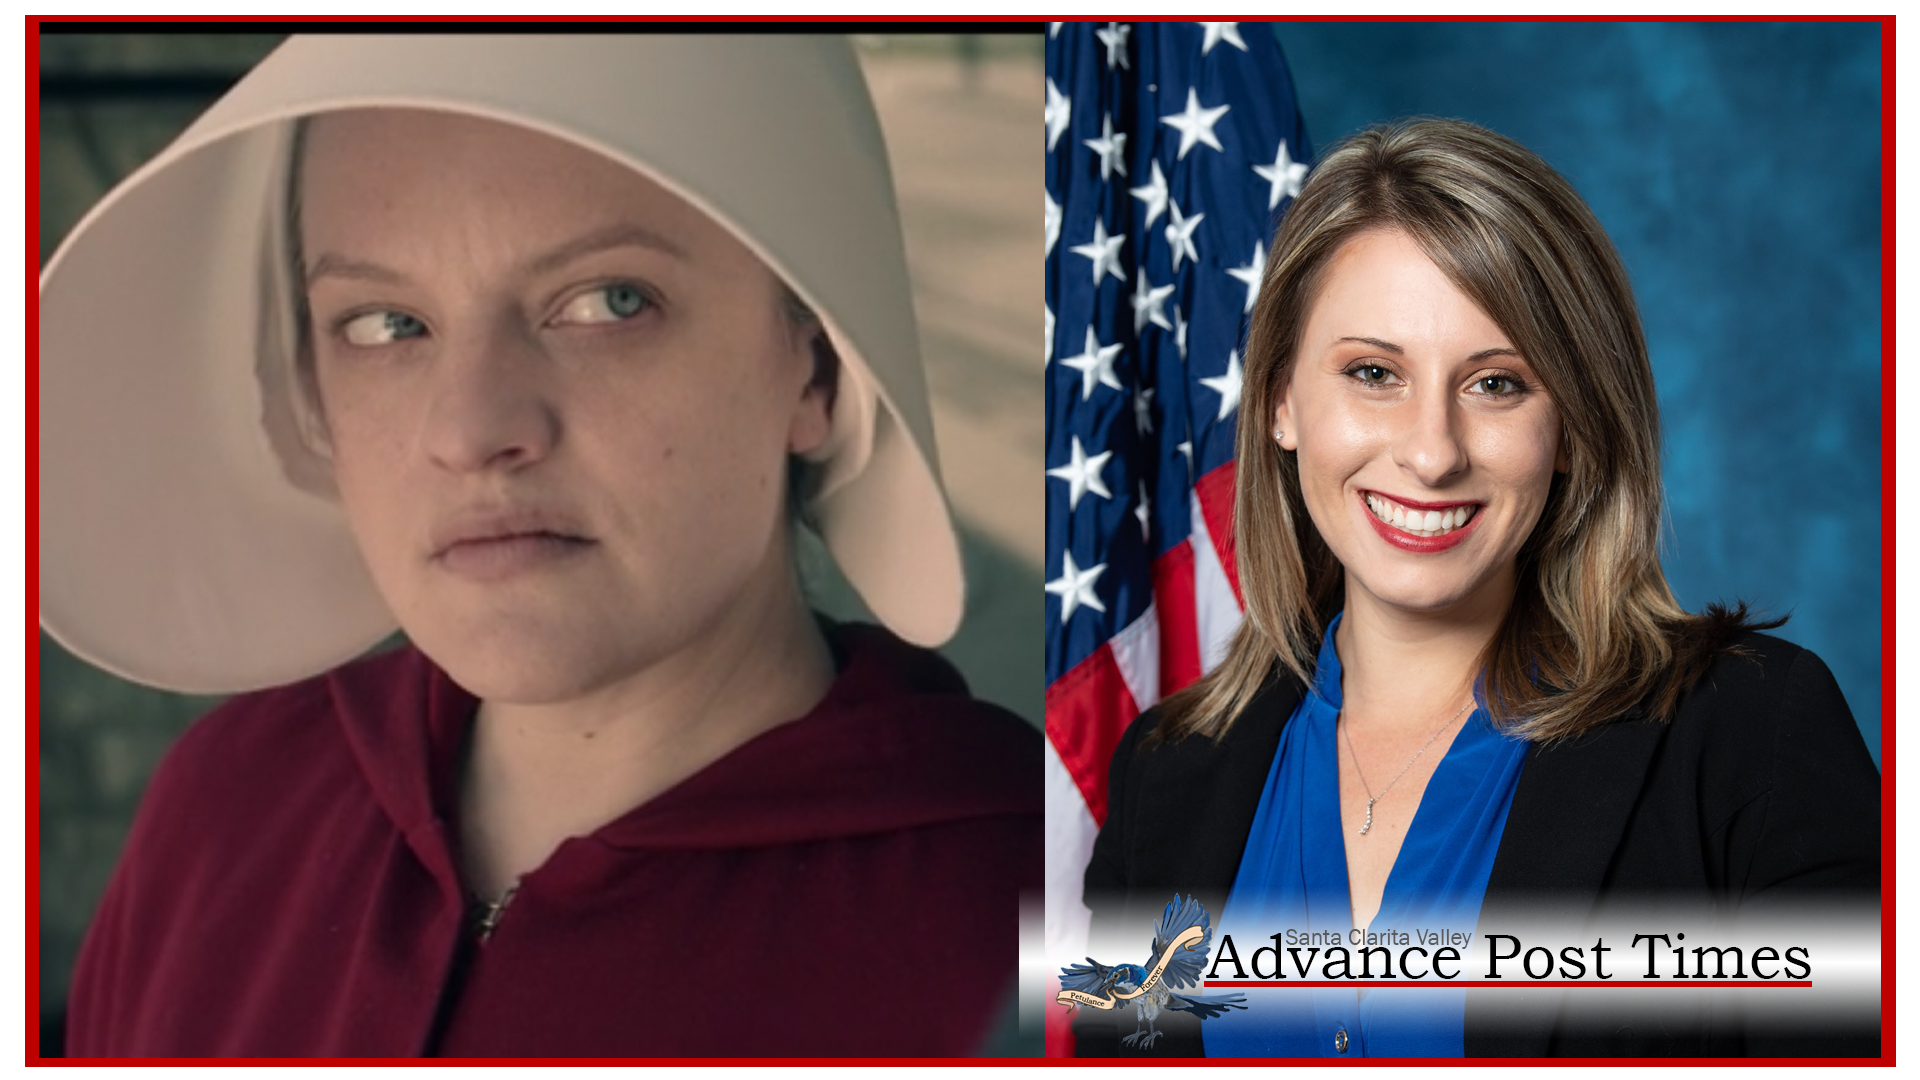 Former Representative Katie Hill Producing Prequel to “Handmaid’s Tale” Based on Her Life in Congress